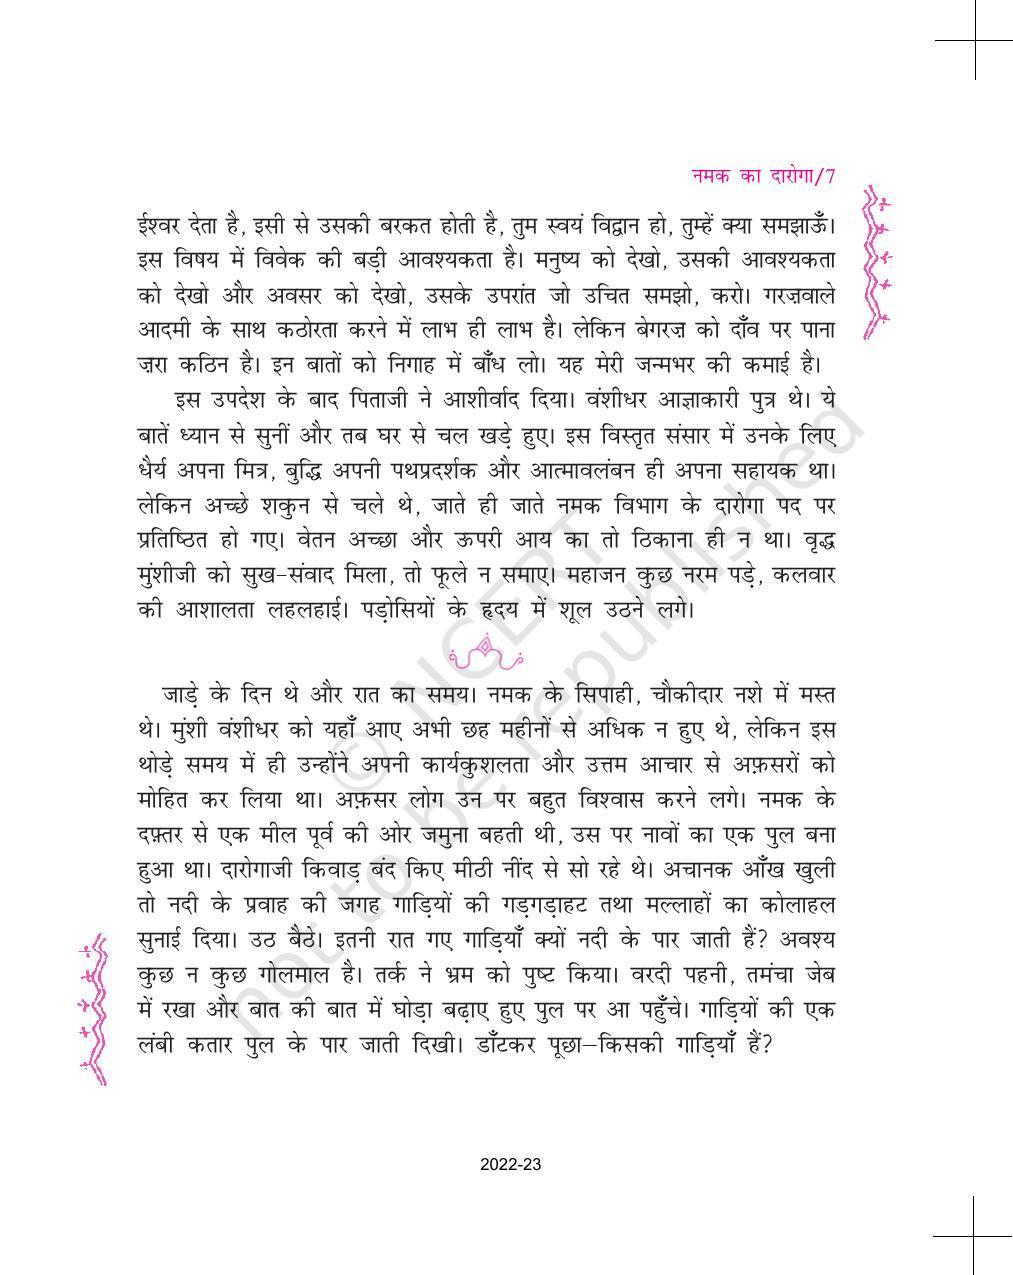 NCERT Book for Class 11 Hindi Aroh Chapter 1 नमक का दारोगा - Page 7